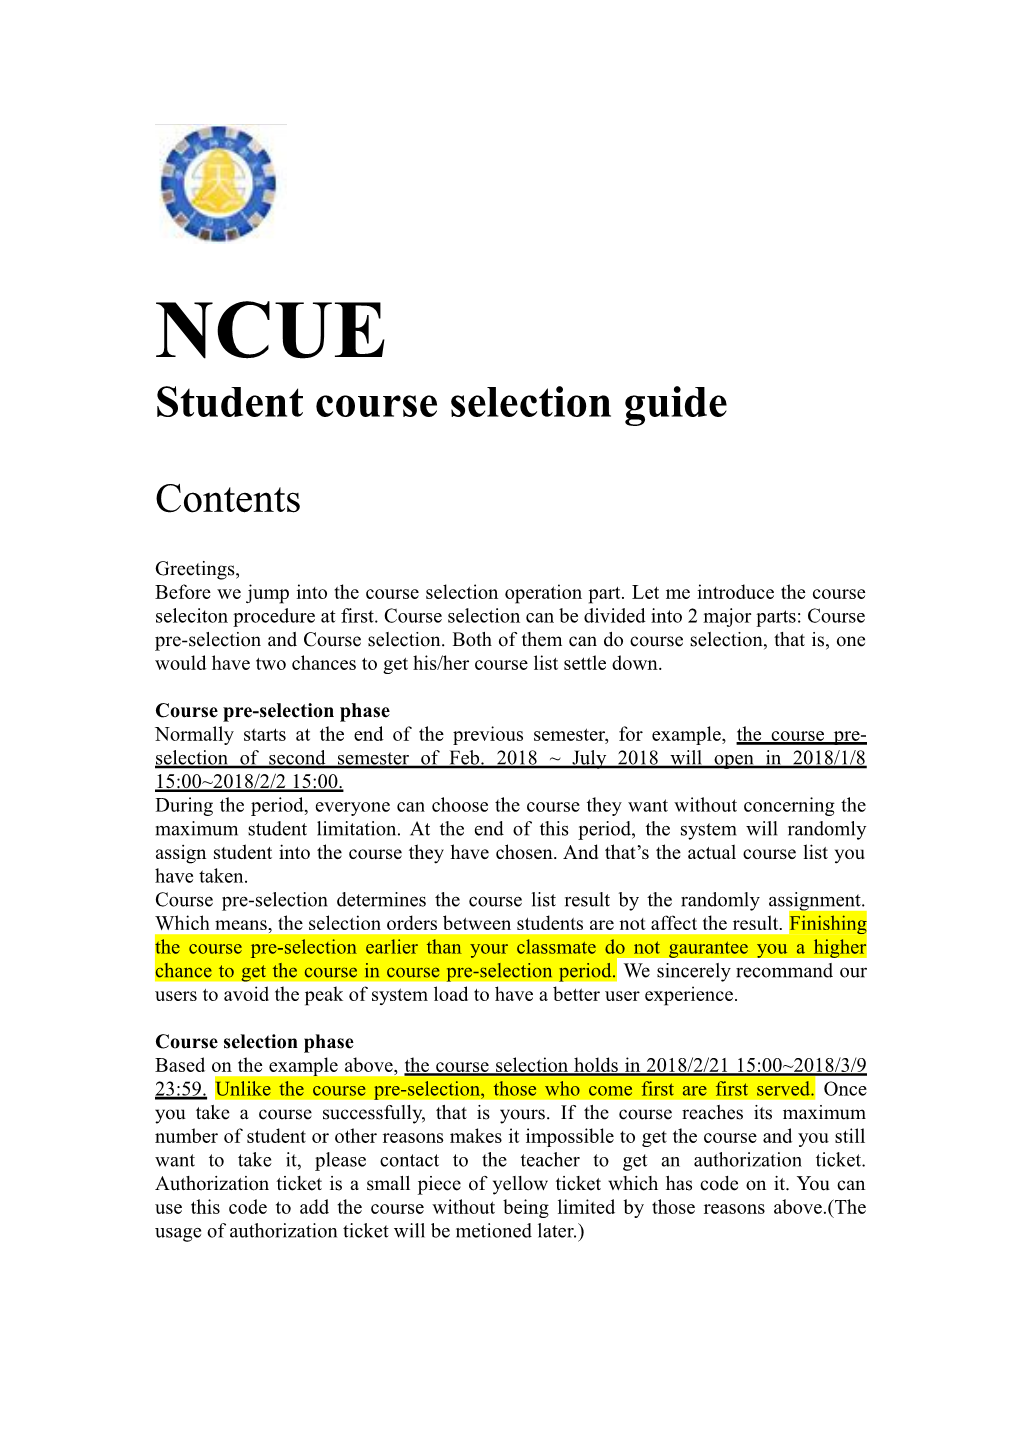 Student Course Selection Guide